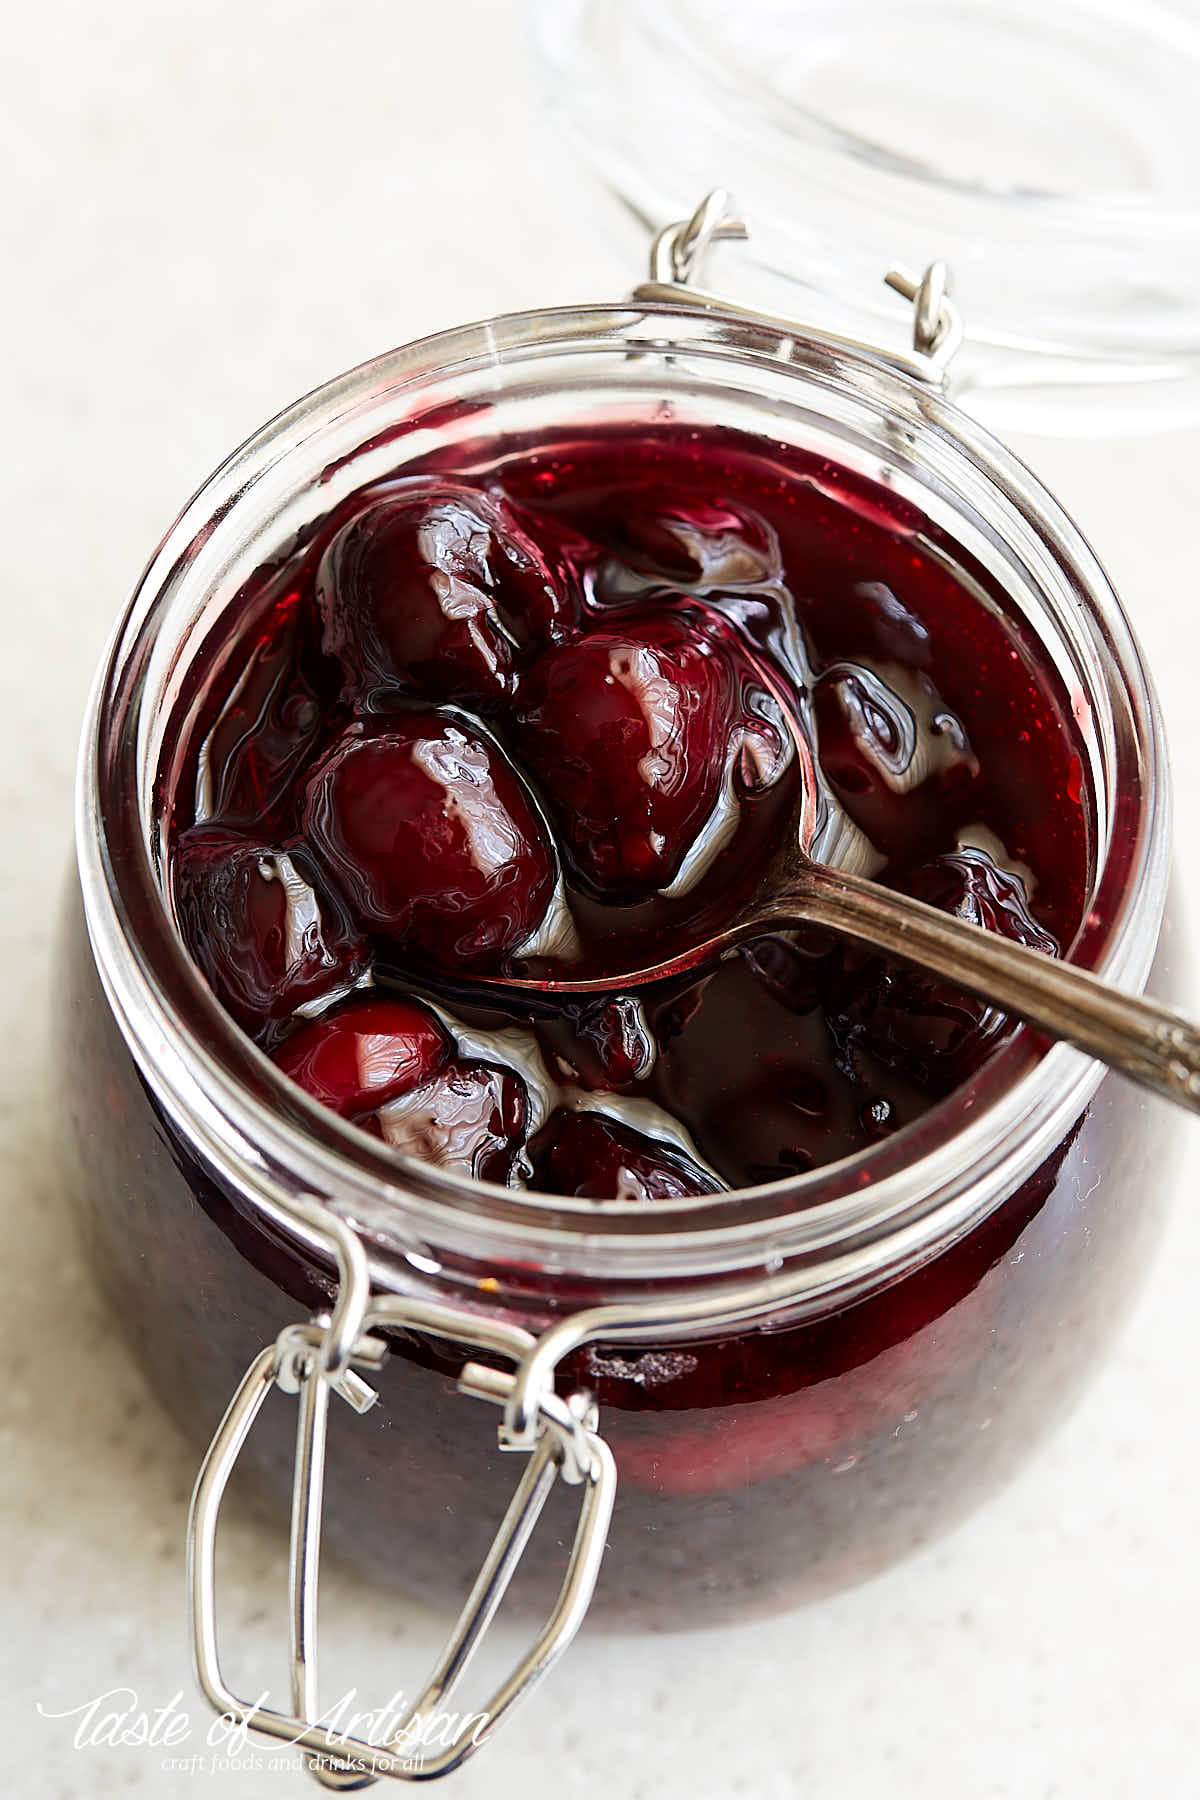 Cherry pie filling inside a jar with a spoon inserted in the jar.